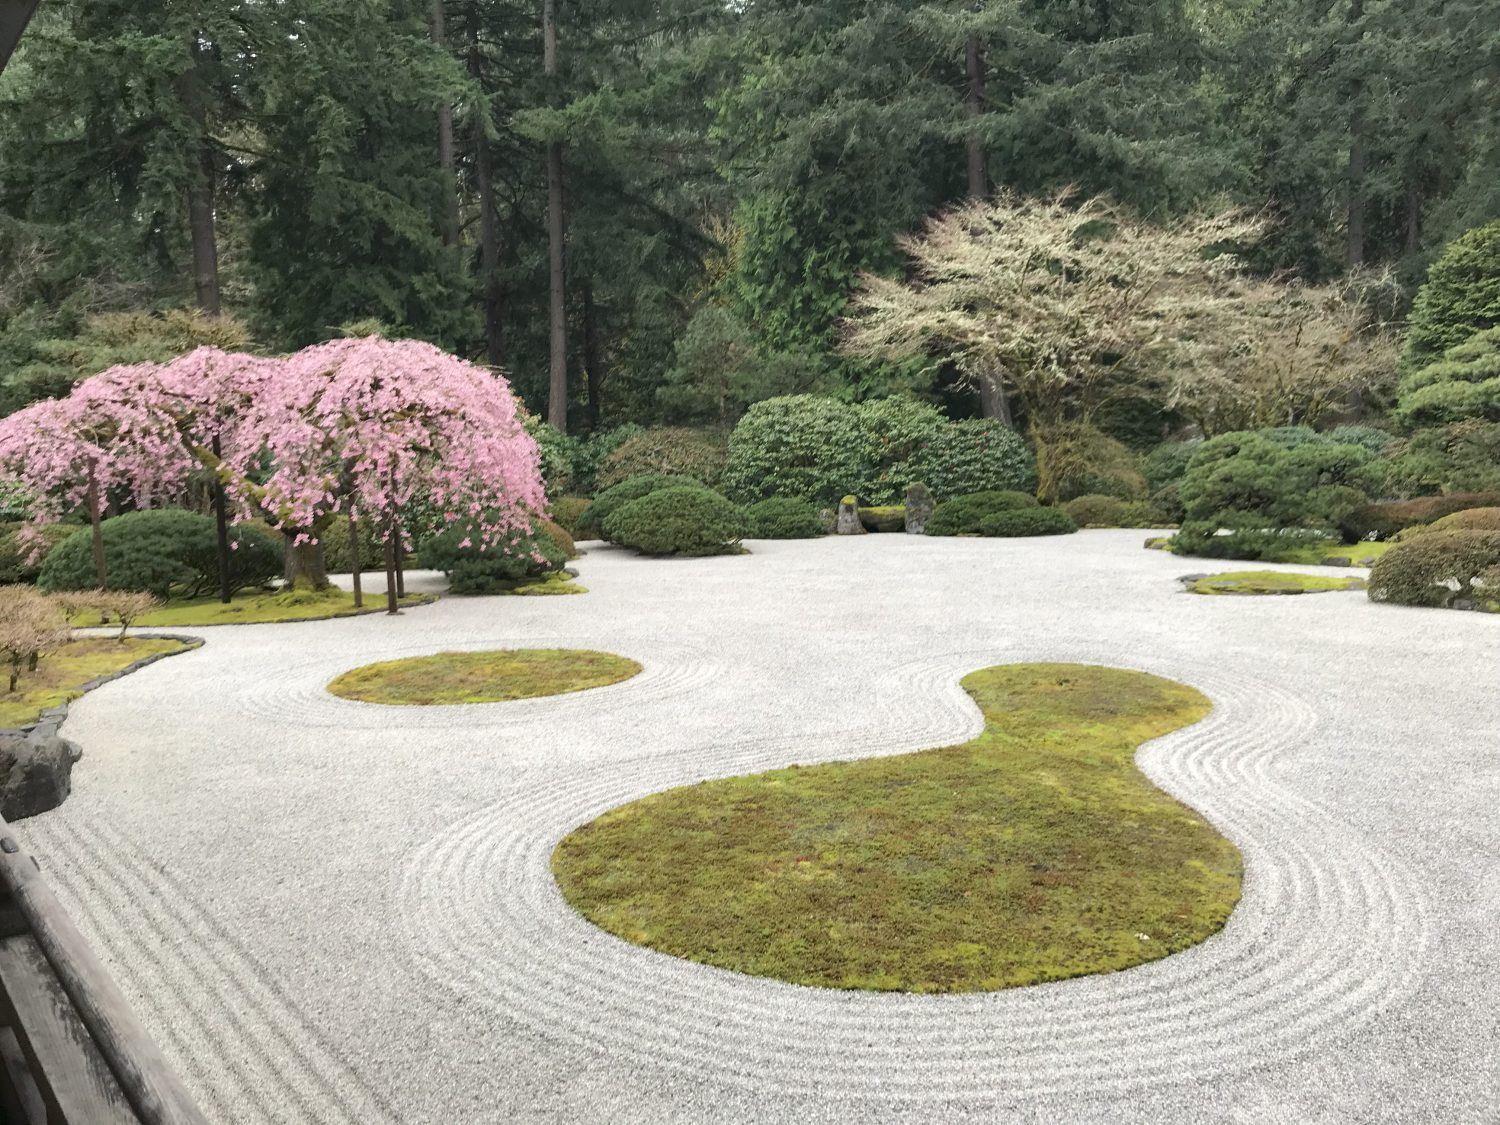 garden grounds at the japanese garden, which include sand designs with grass in the middle and pink trees